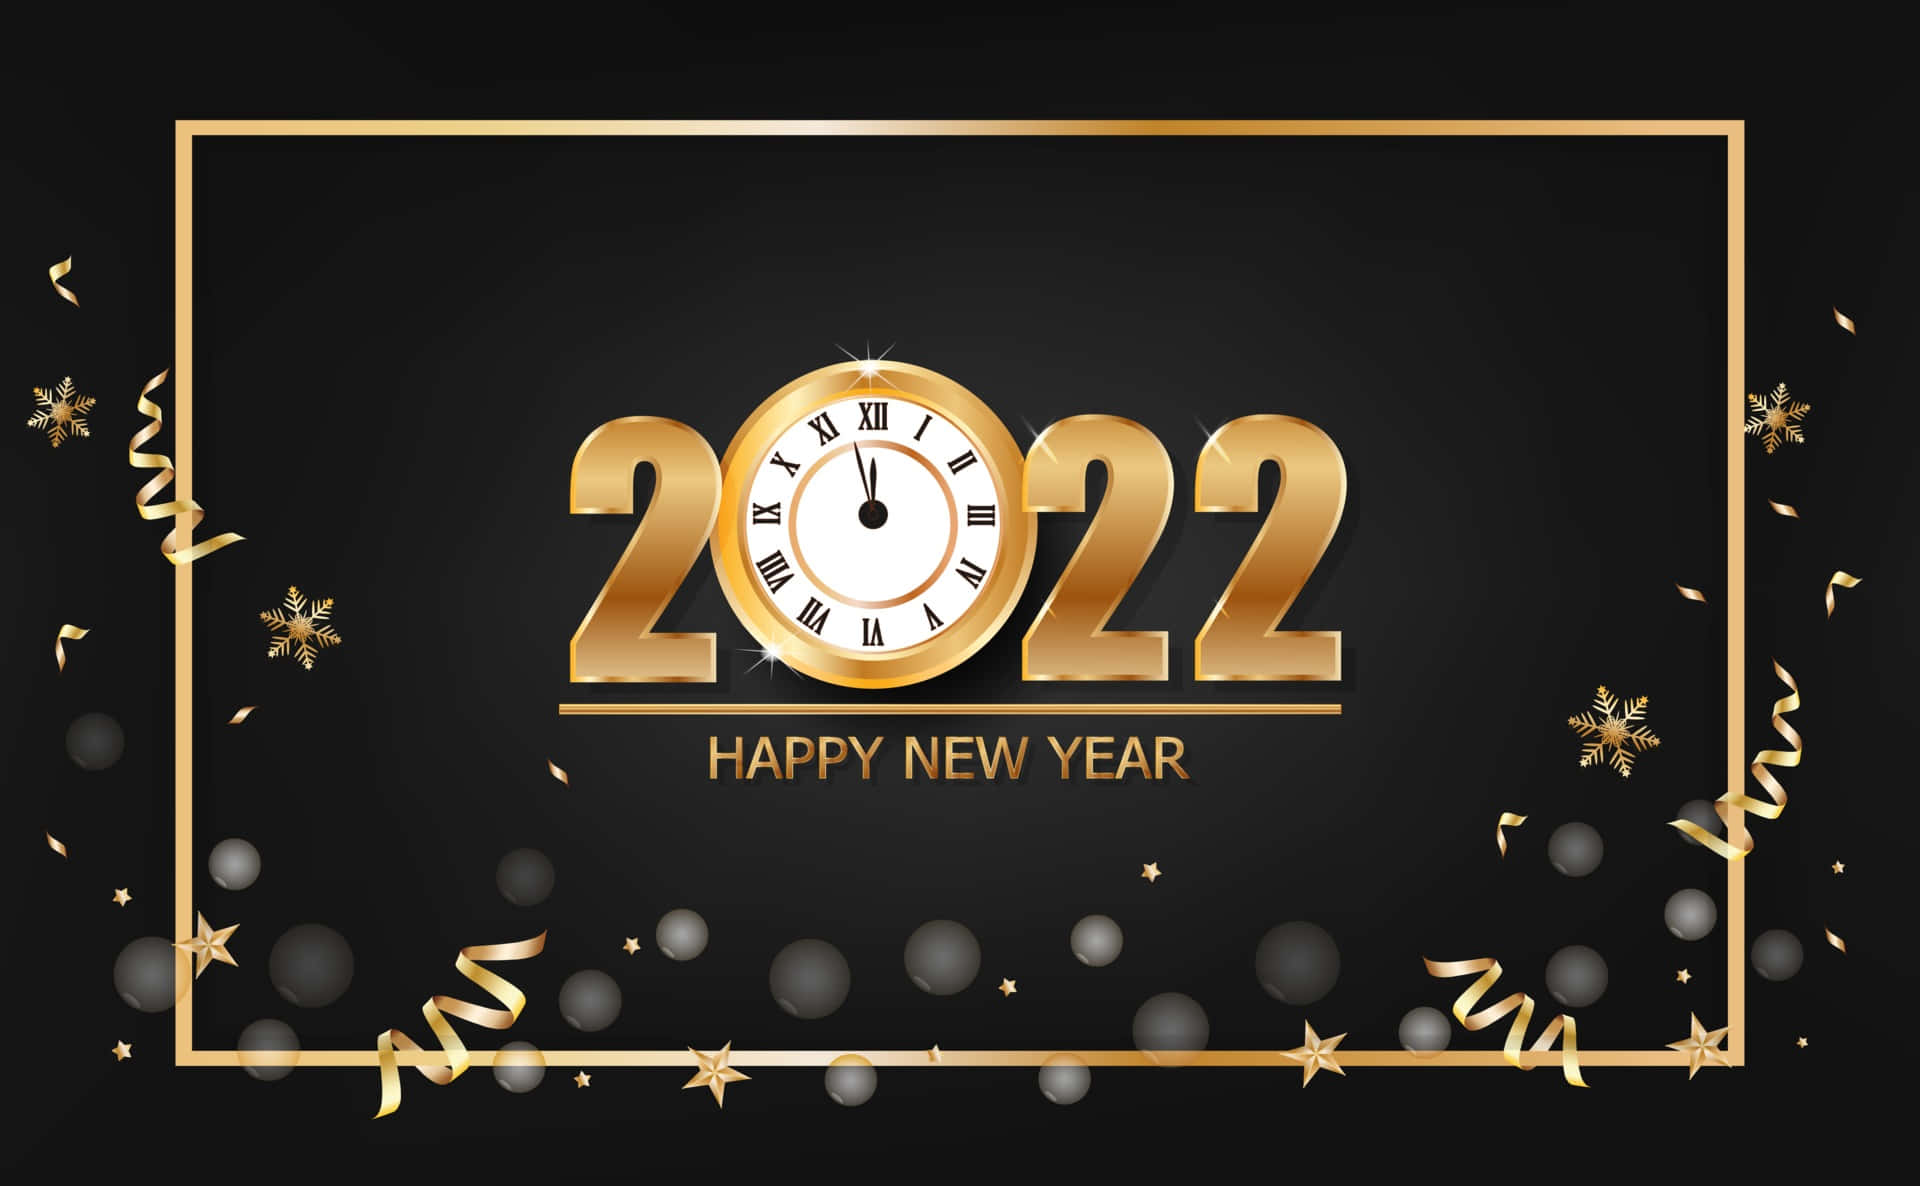 Happy New Year 2022 - New Year's Resolutions Are Here!